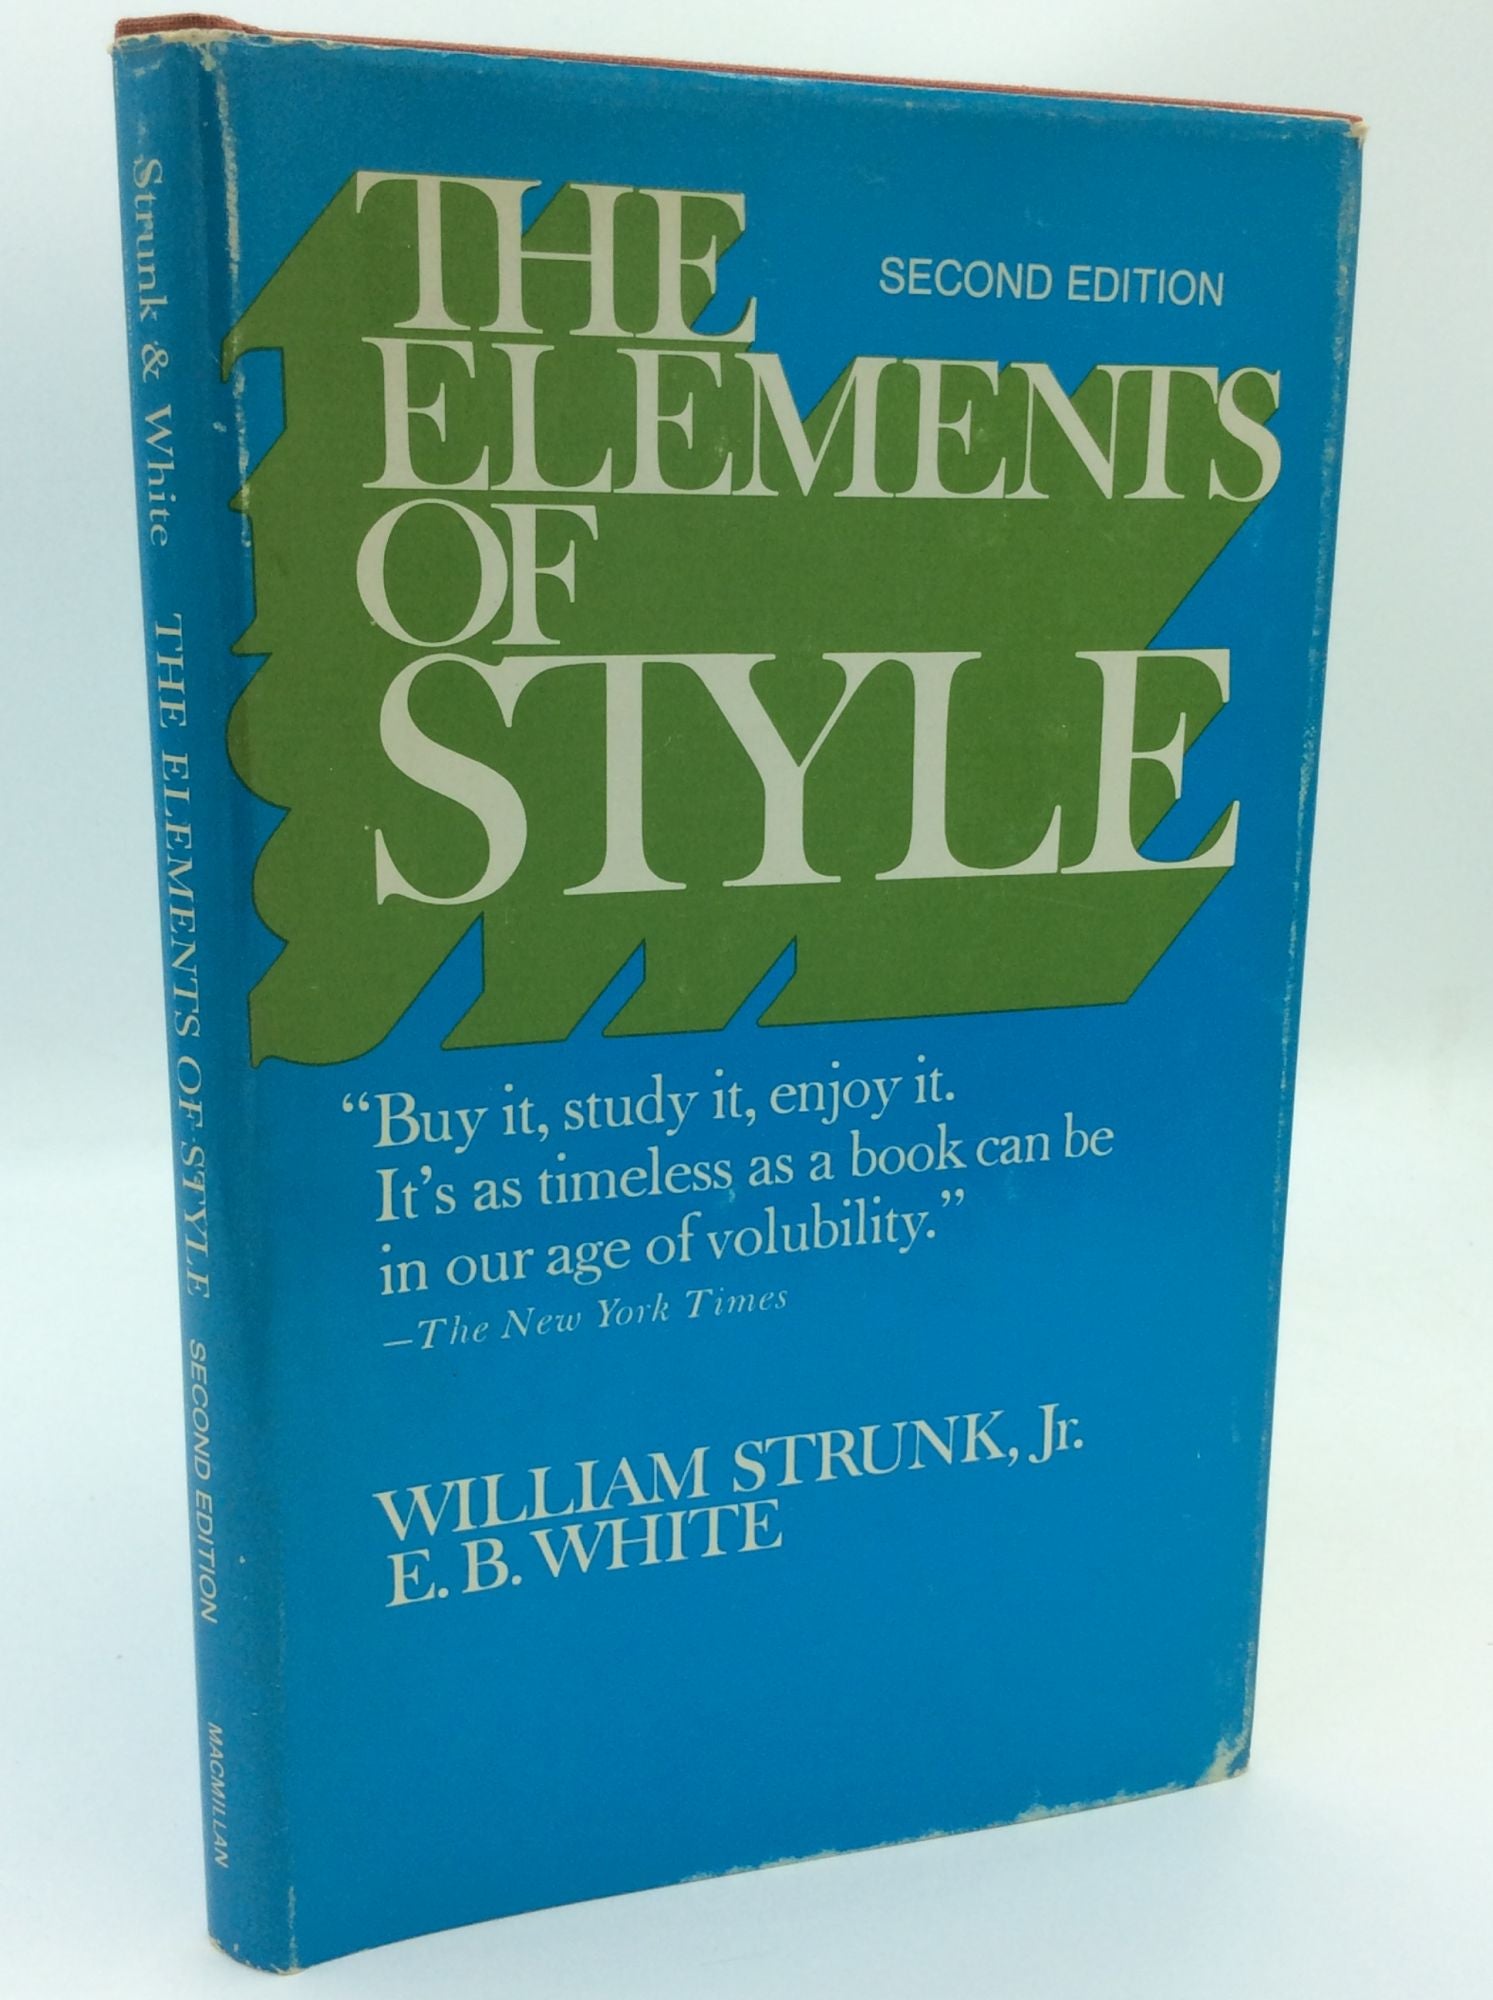 William Strunk, Jr.; E.B. White, rev - The Elements of Style